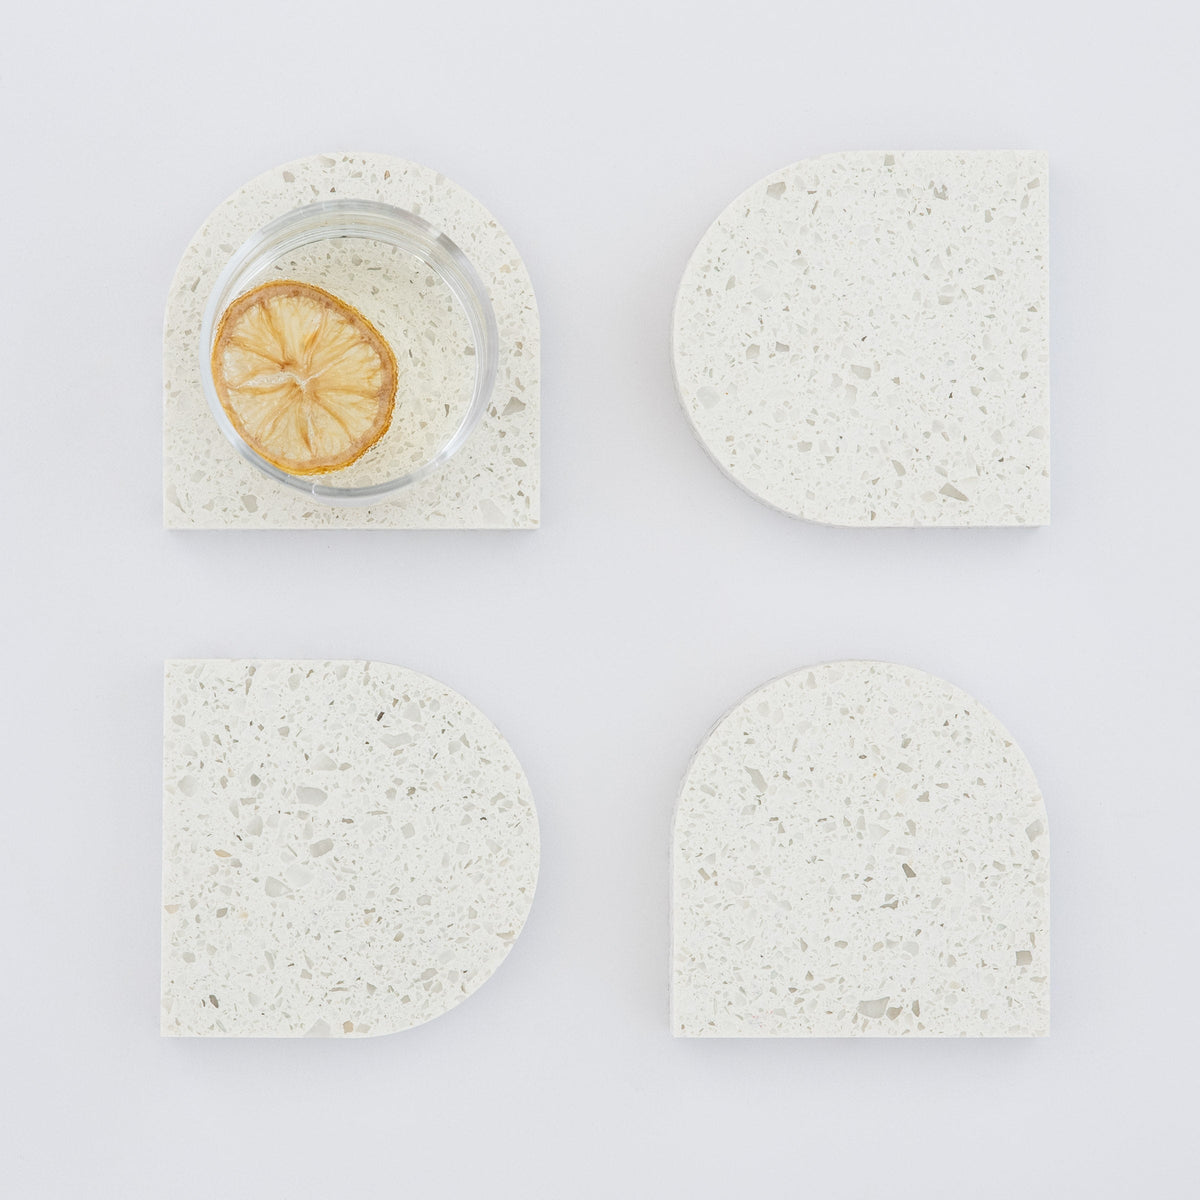 Quartz Arch Coaster™ Set 4 Piece in Nougat™. Quartz white stone coasters in an arch shape. These white quartz coasters are specked with decorative quartz with a cork backing. White marble coasters in appearance however quartz has greater scratch resistance and is lower maintenance. caesarstone quartz